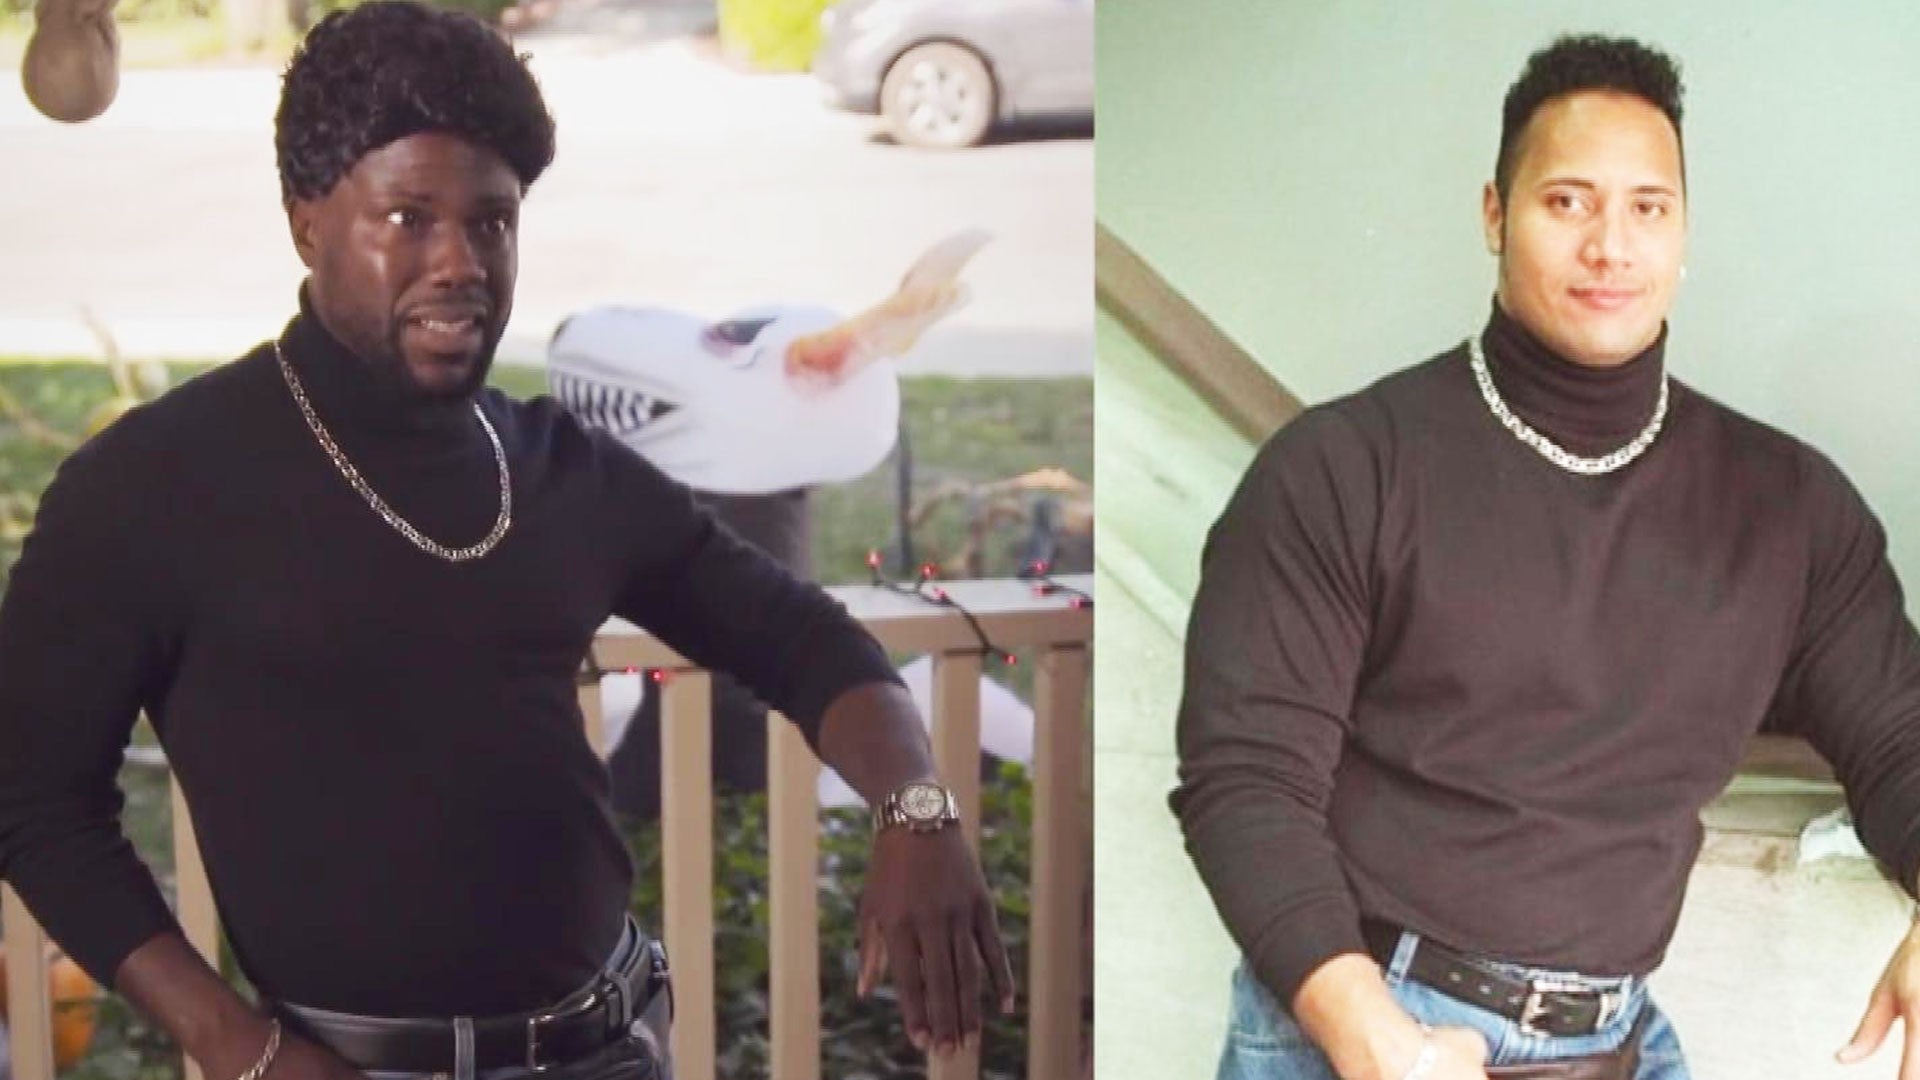 kevin hart halloween costume 2020 Kevin Hart Dresses Up As Dwayne The Rock Johnson For Halloween In Hilarious New Video Watch Entertainment Tonight kevin hart halloween costume 2020